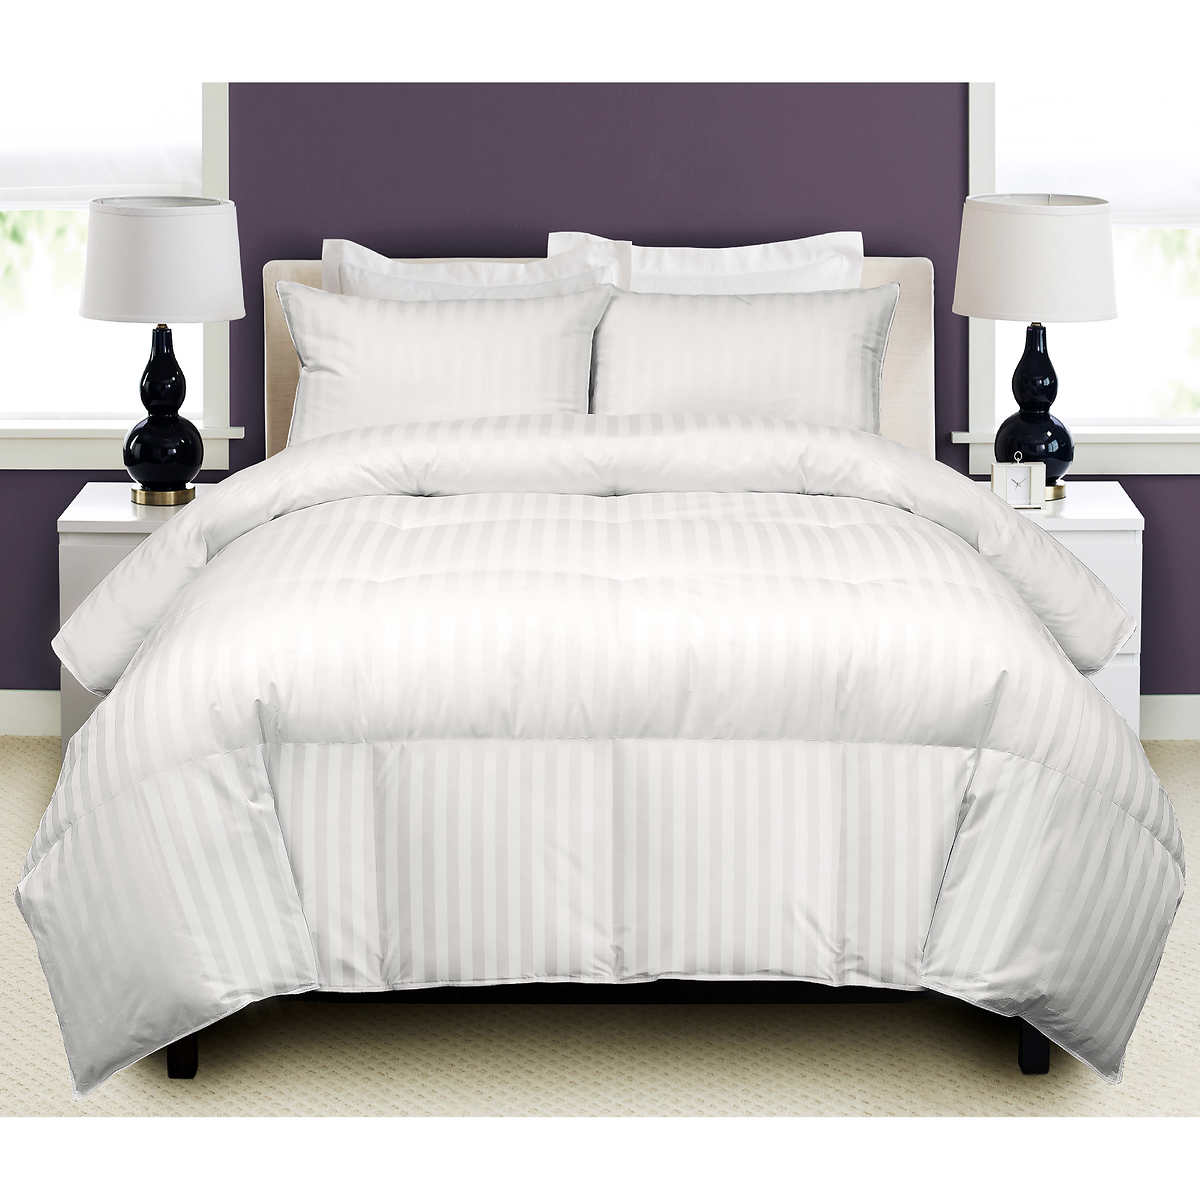 NEW Hotel Collection White Down Medium Weight KING Comforter $620 I170 